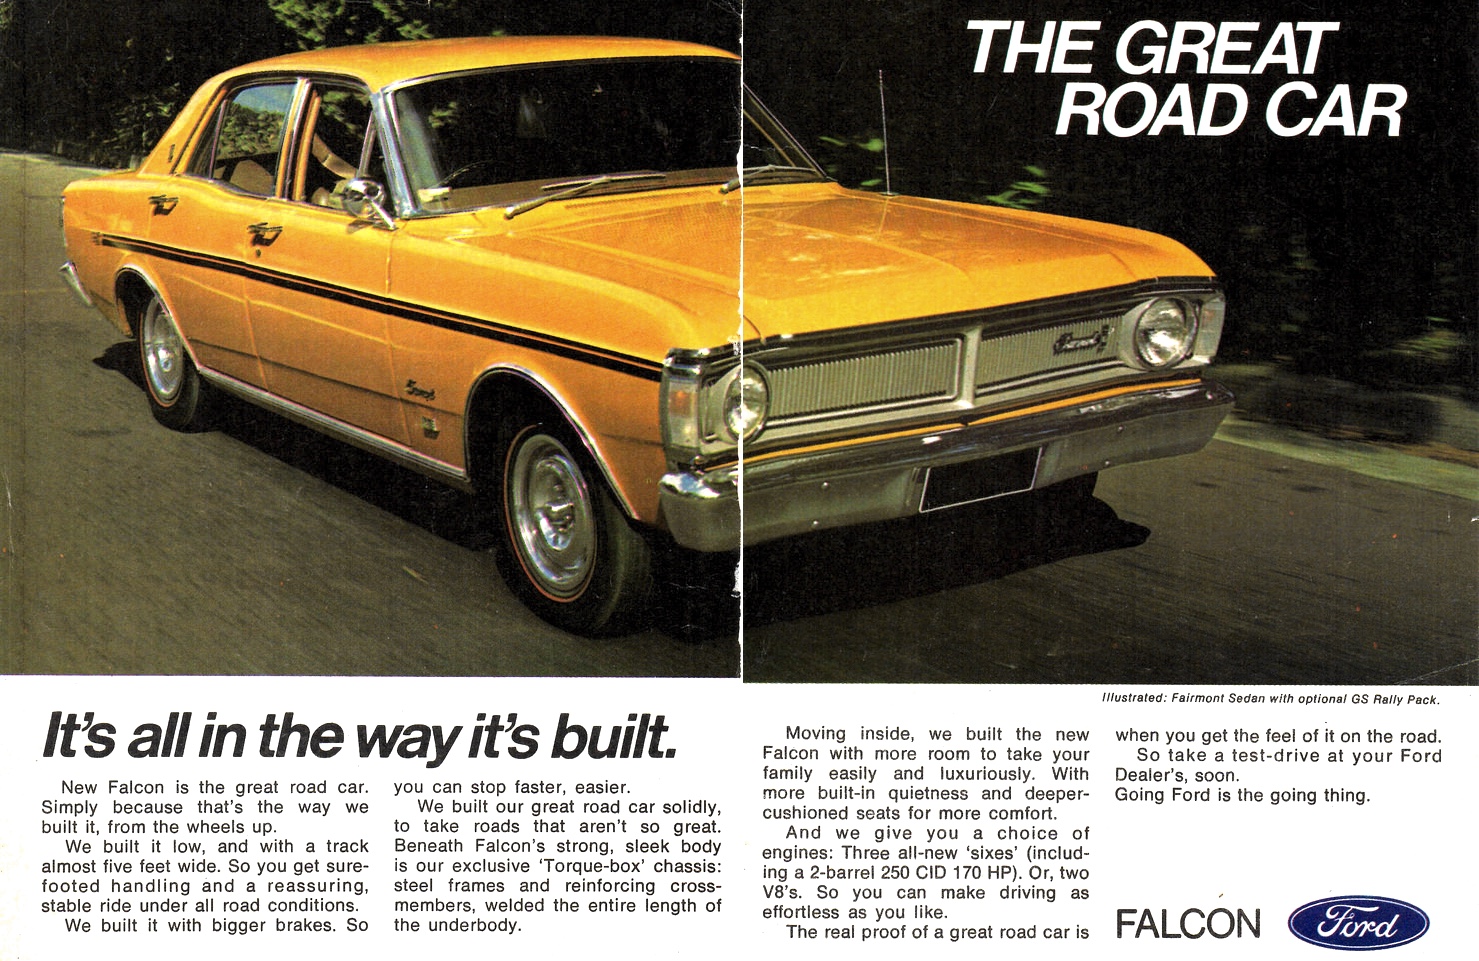 1971 XY Ford Fairmont GS Rally Pack 